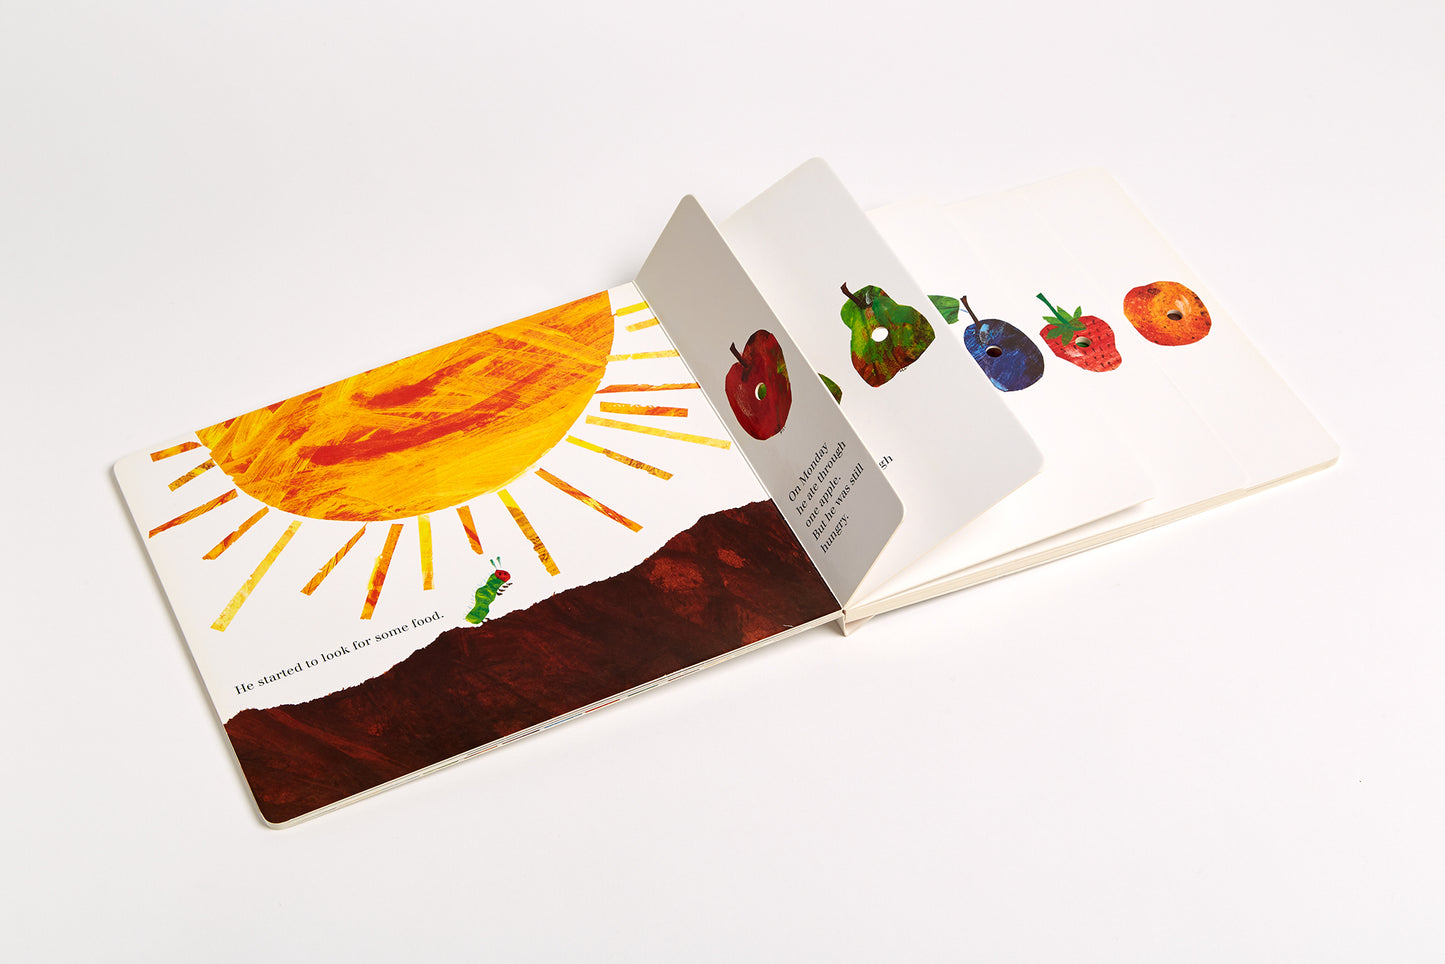 inside view of book with a caterpillar in the sun and multiple fruits on the other page